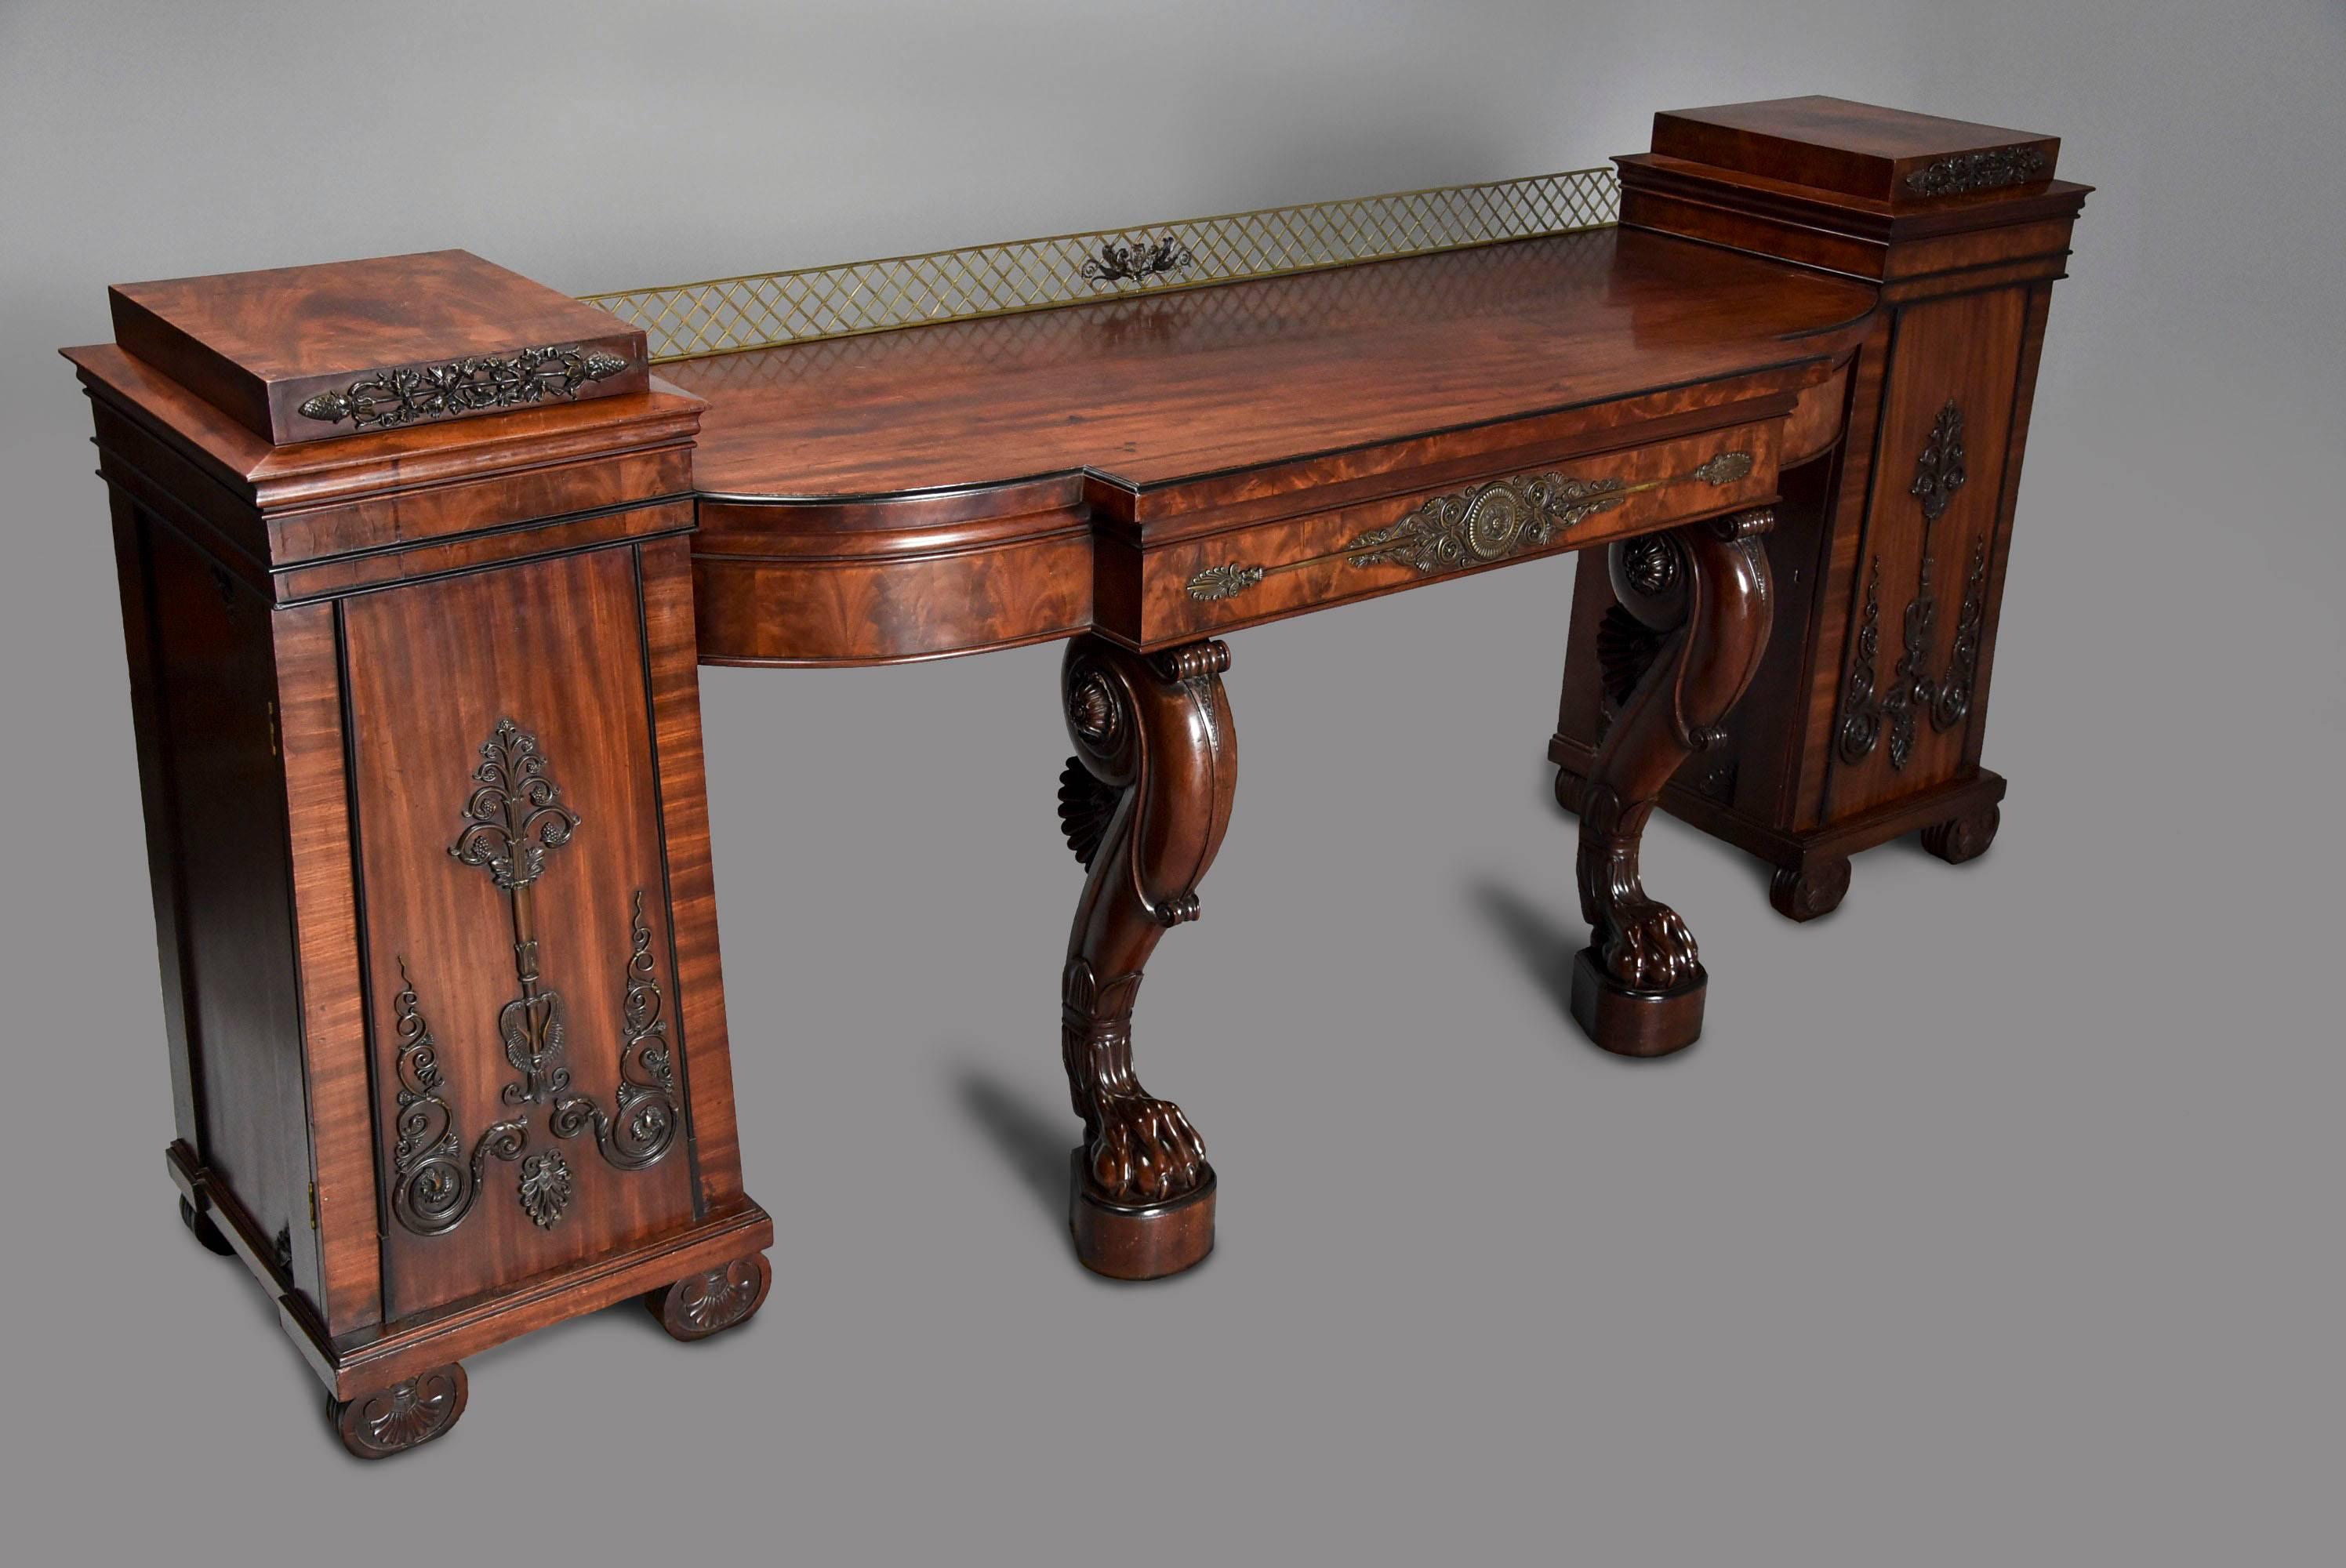 A superb quality extremely rare early 19th century Regency mahogany pedestal sideboard in excellent original condition with superb patina, in the manner of Thomas Hope (1769-1831)

This substantial sideboard consists of a fine quality mahogany top